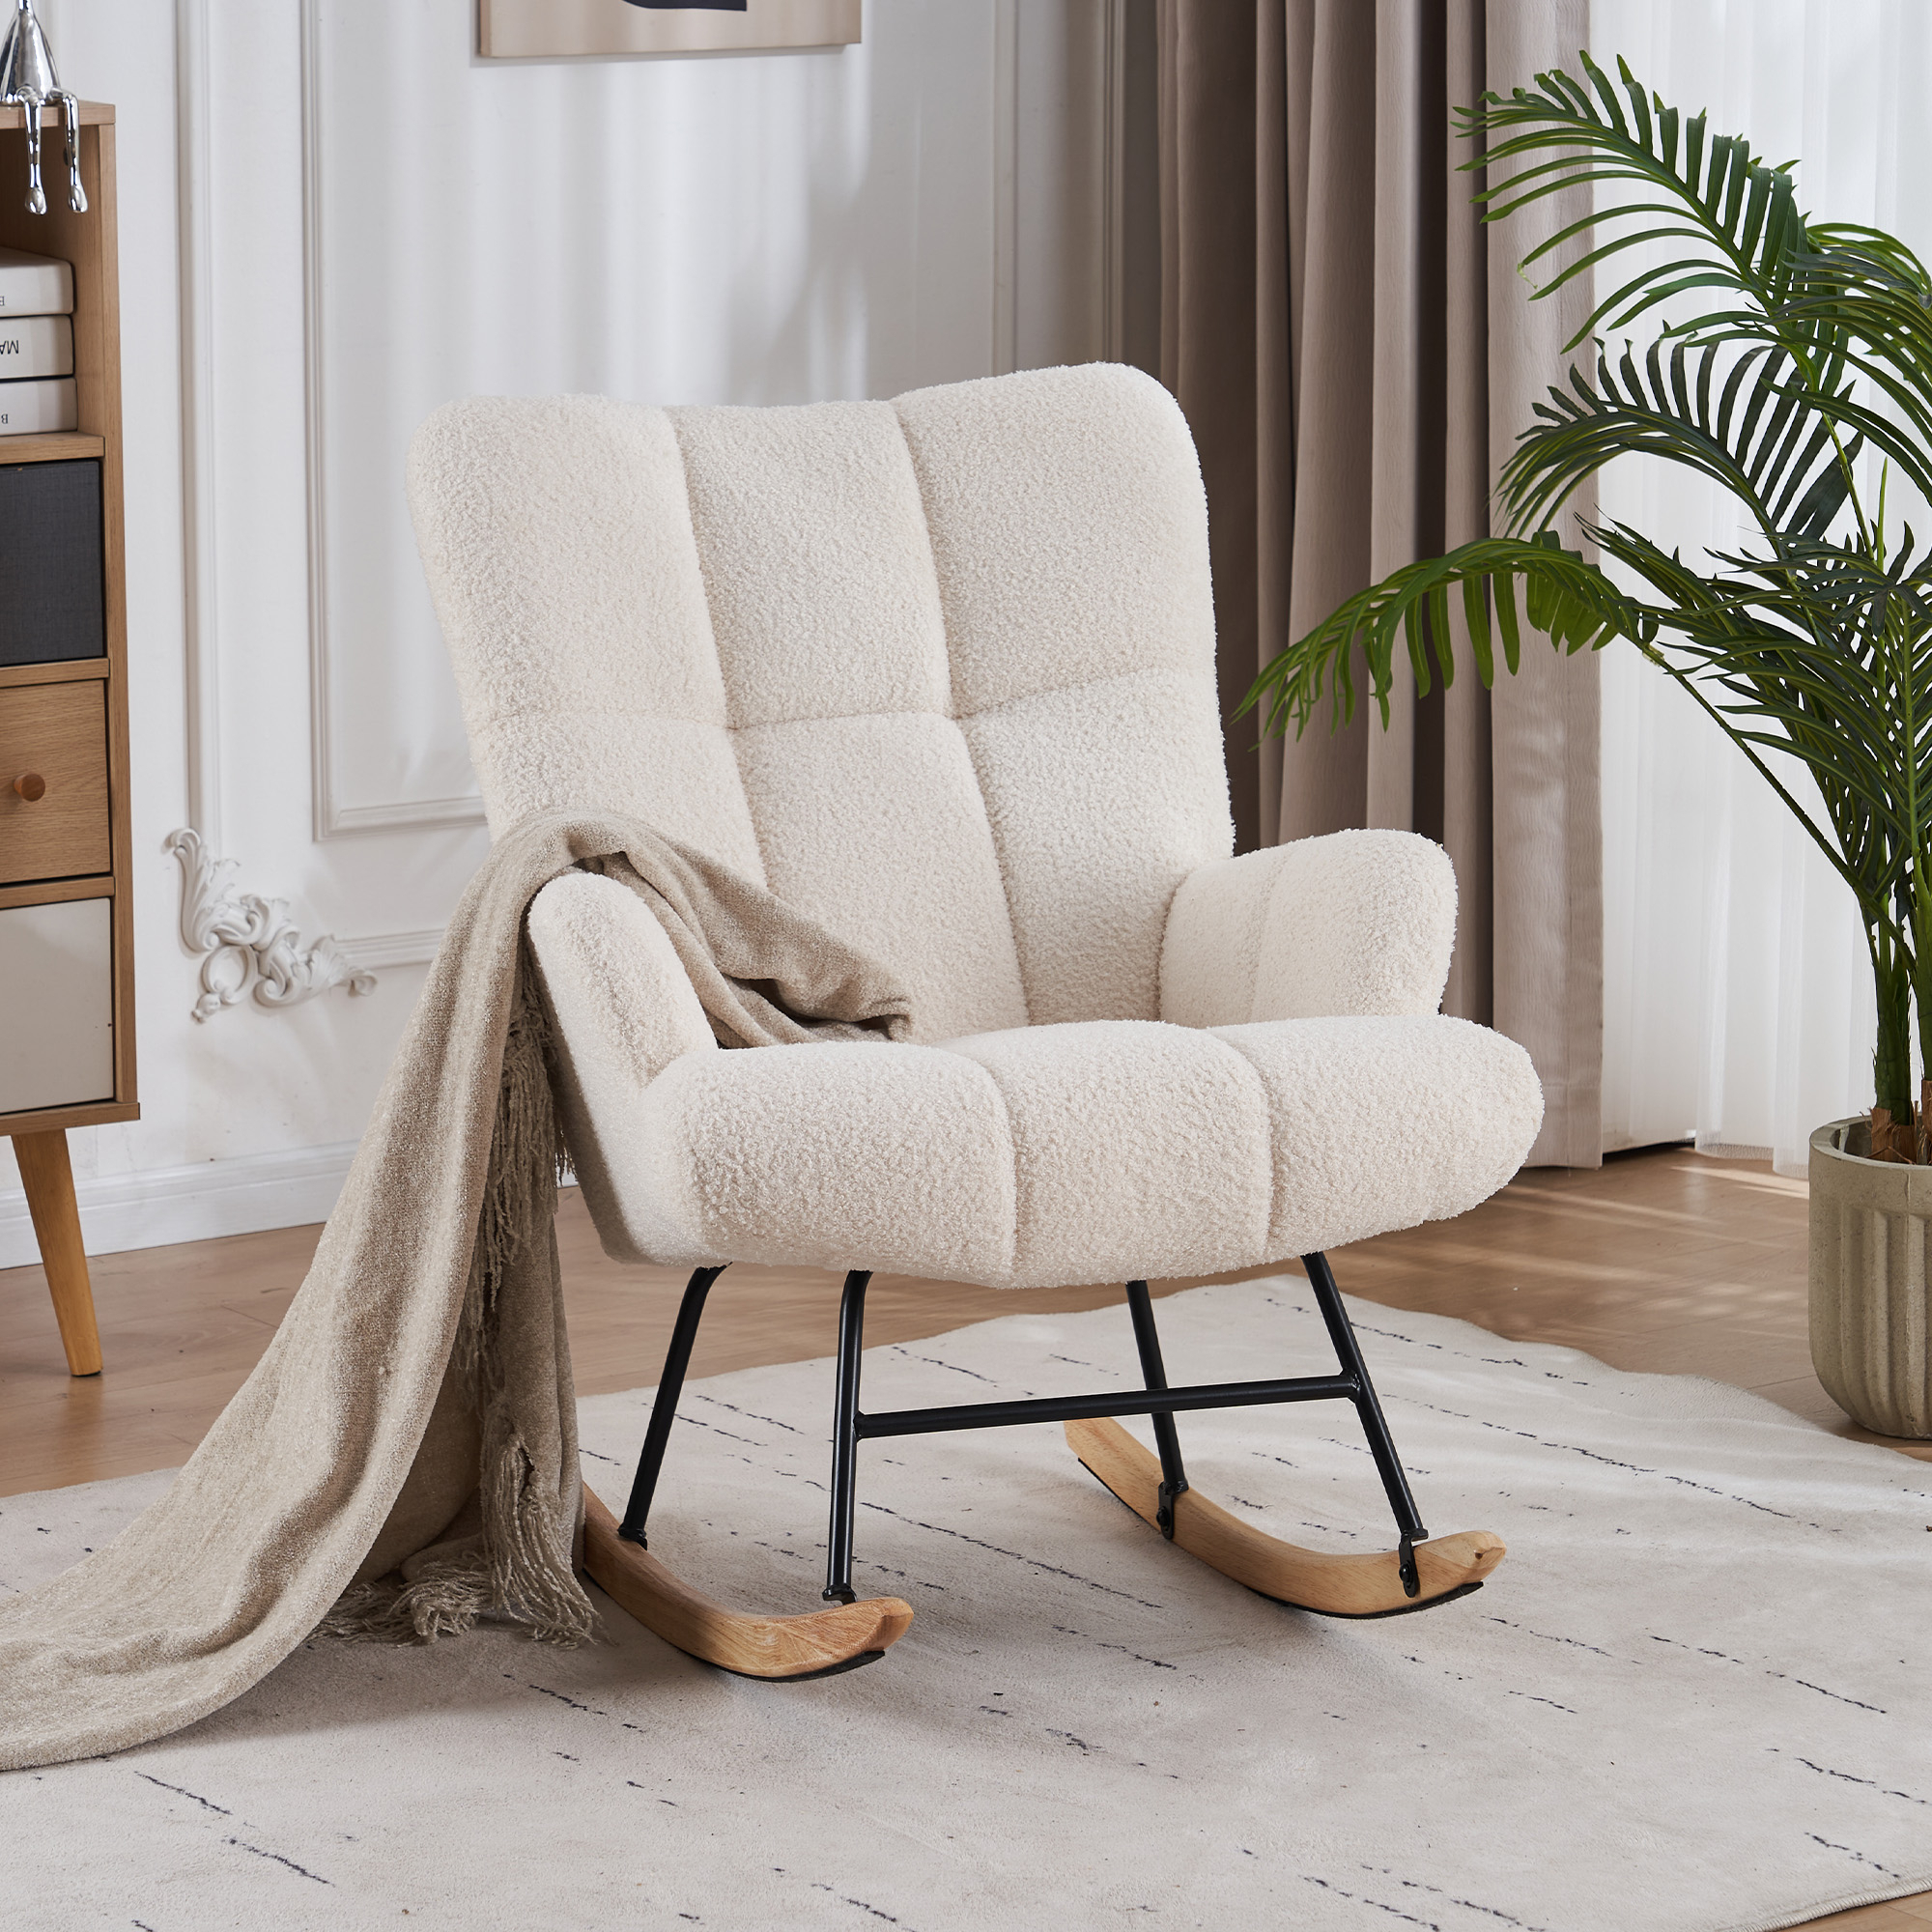 Teddy Velvet Rocking Accent Chair Uplostered Glider Rocker Armchair For Nursery, Comfy Side Chair With High Backrest